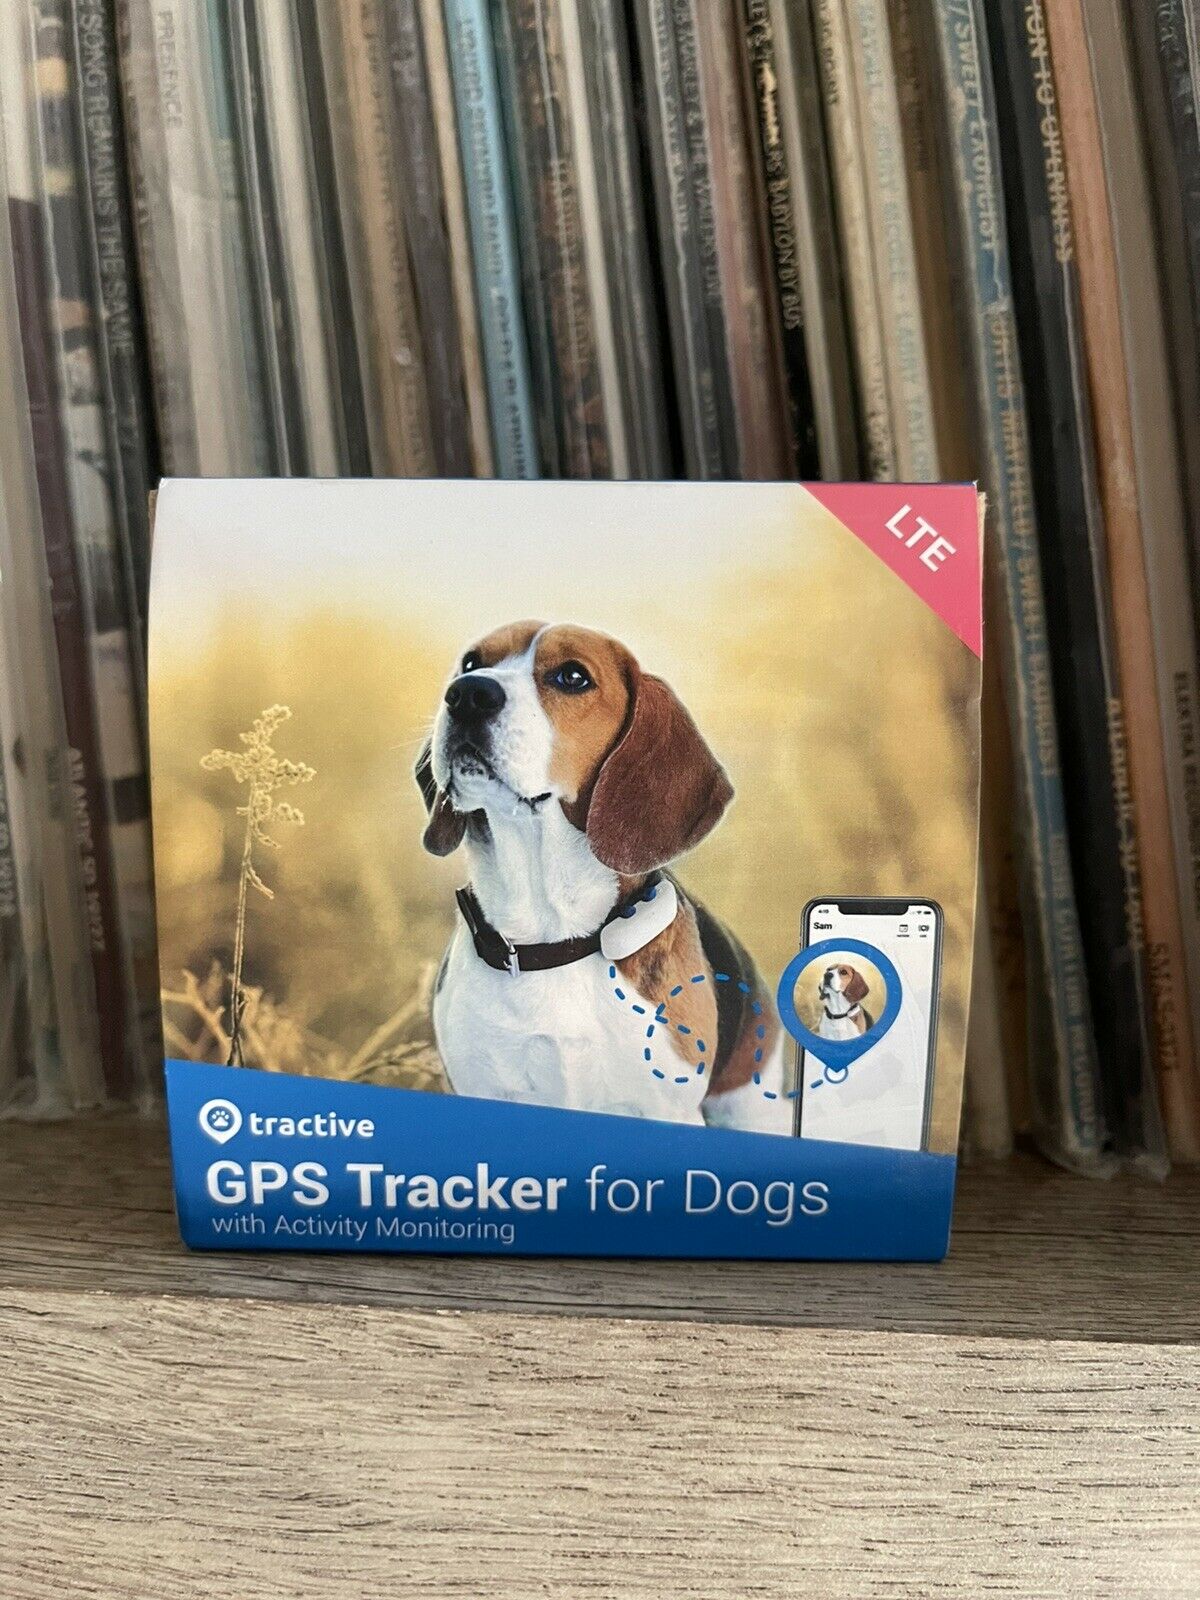 Tractive Lte Gps Dog Tracker - Location & Activity Tracker For Dogs